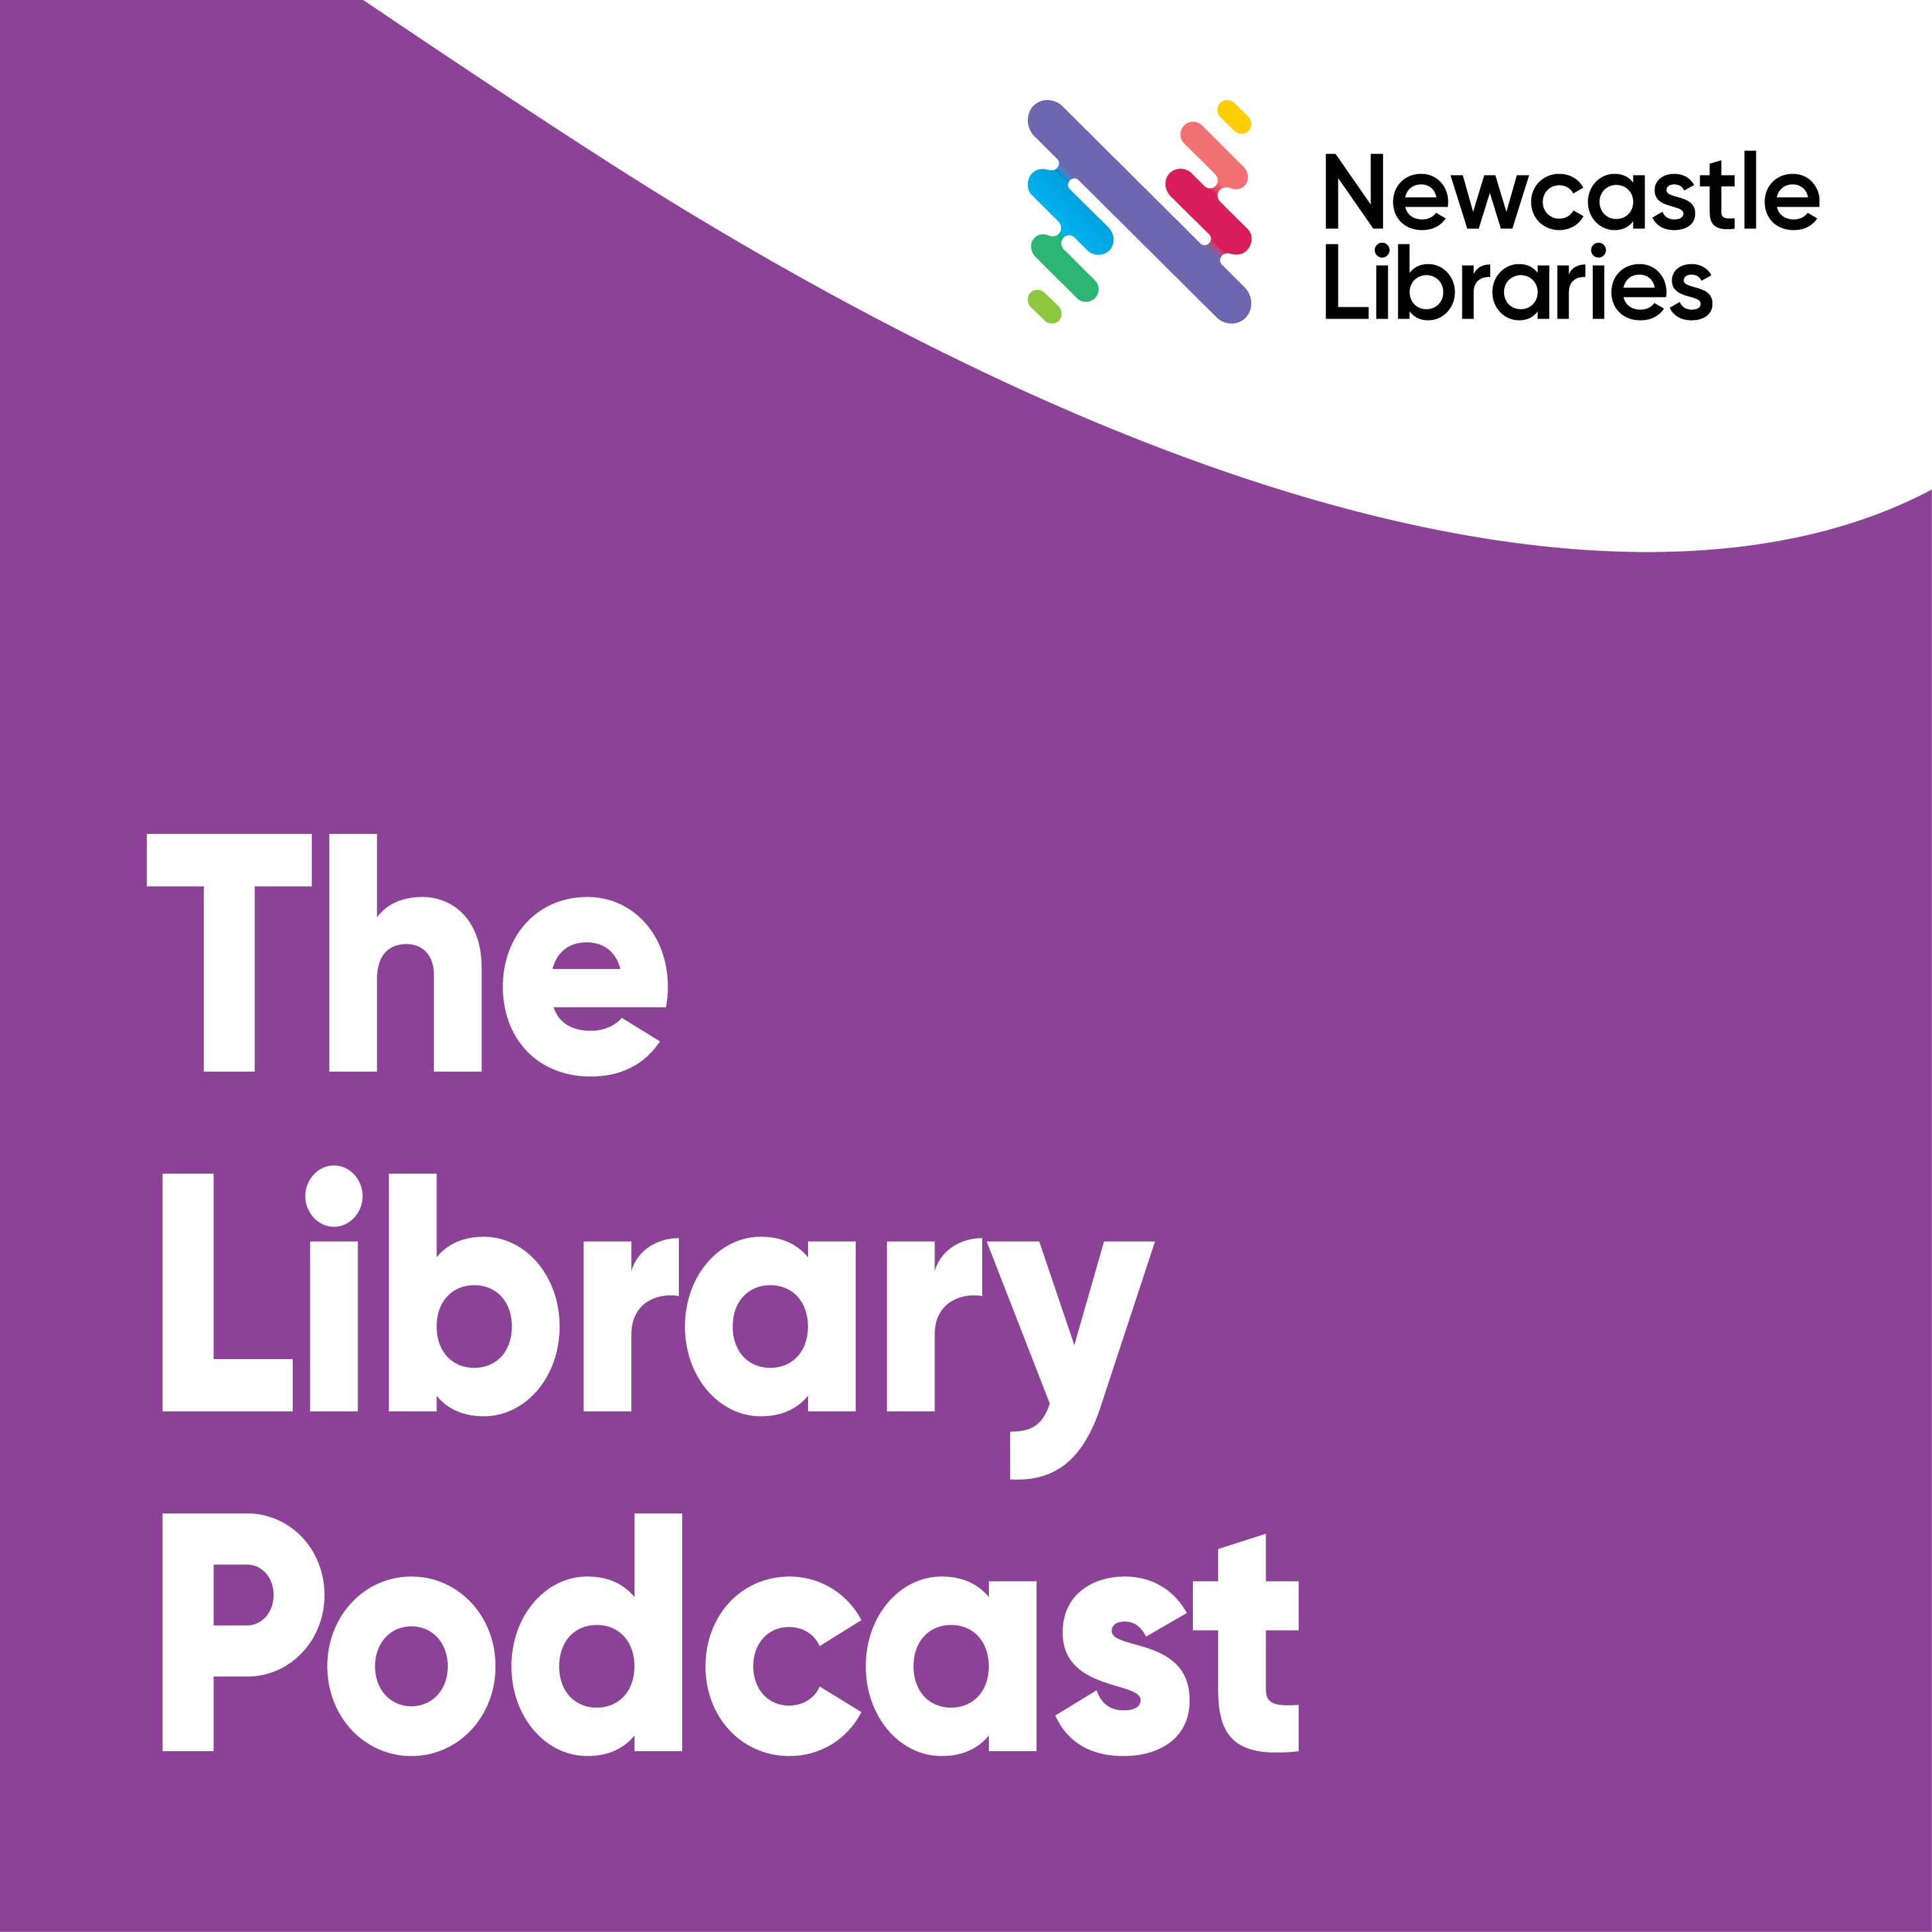 CHATS with Notable Newcastle Authors - Grahame Cooper